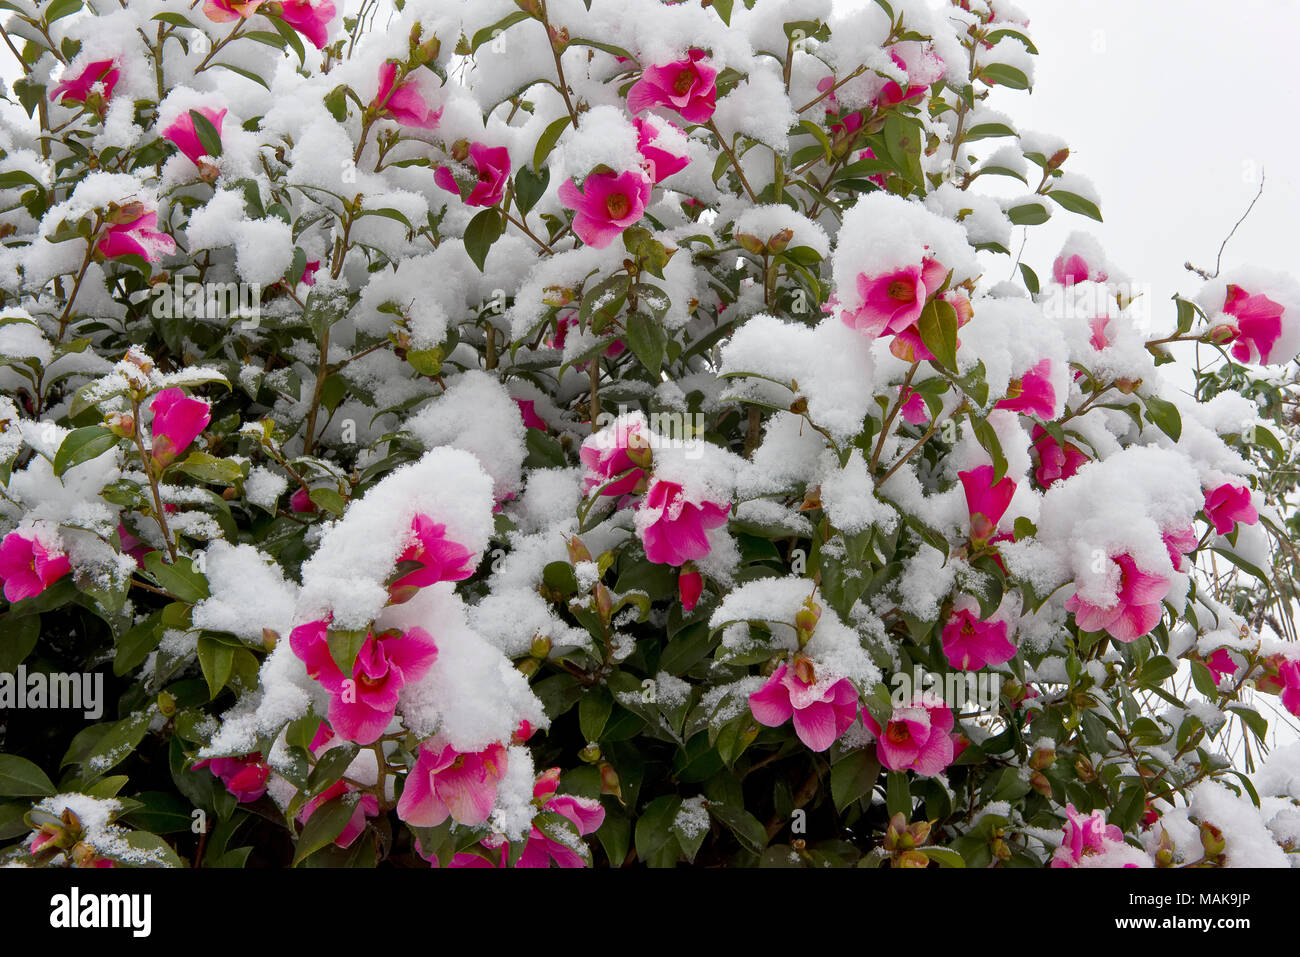 Camellia shrub with pink flowers covered with spring snow in a suburban garden in southern England Stock Photo